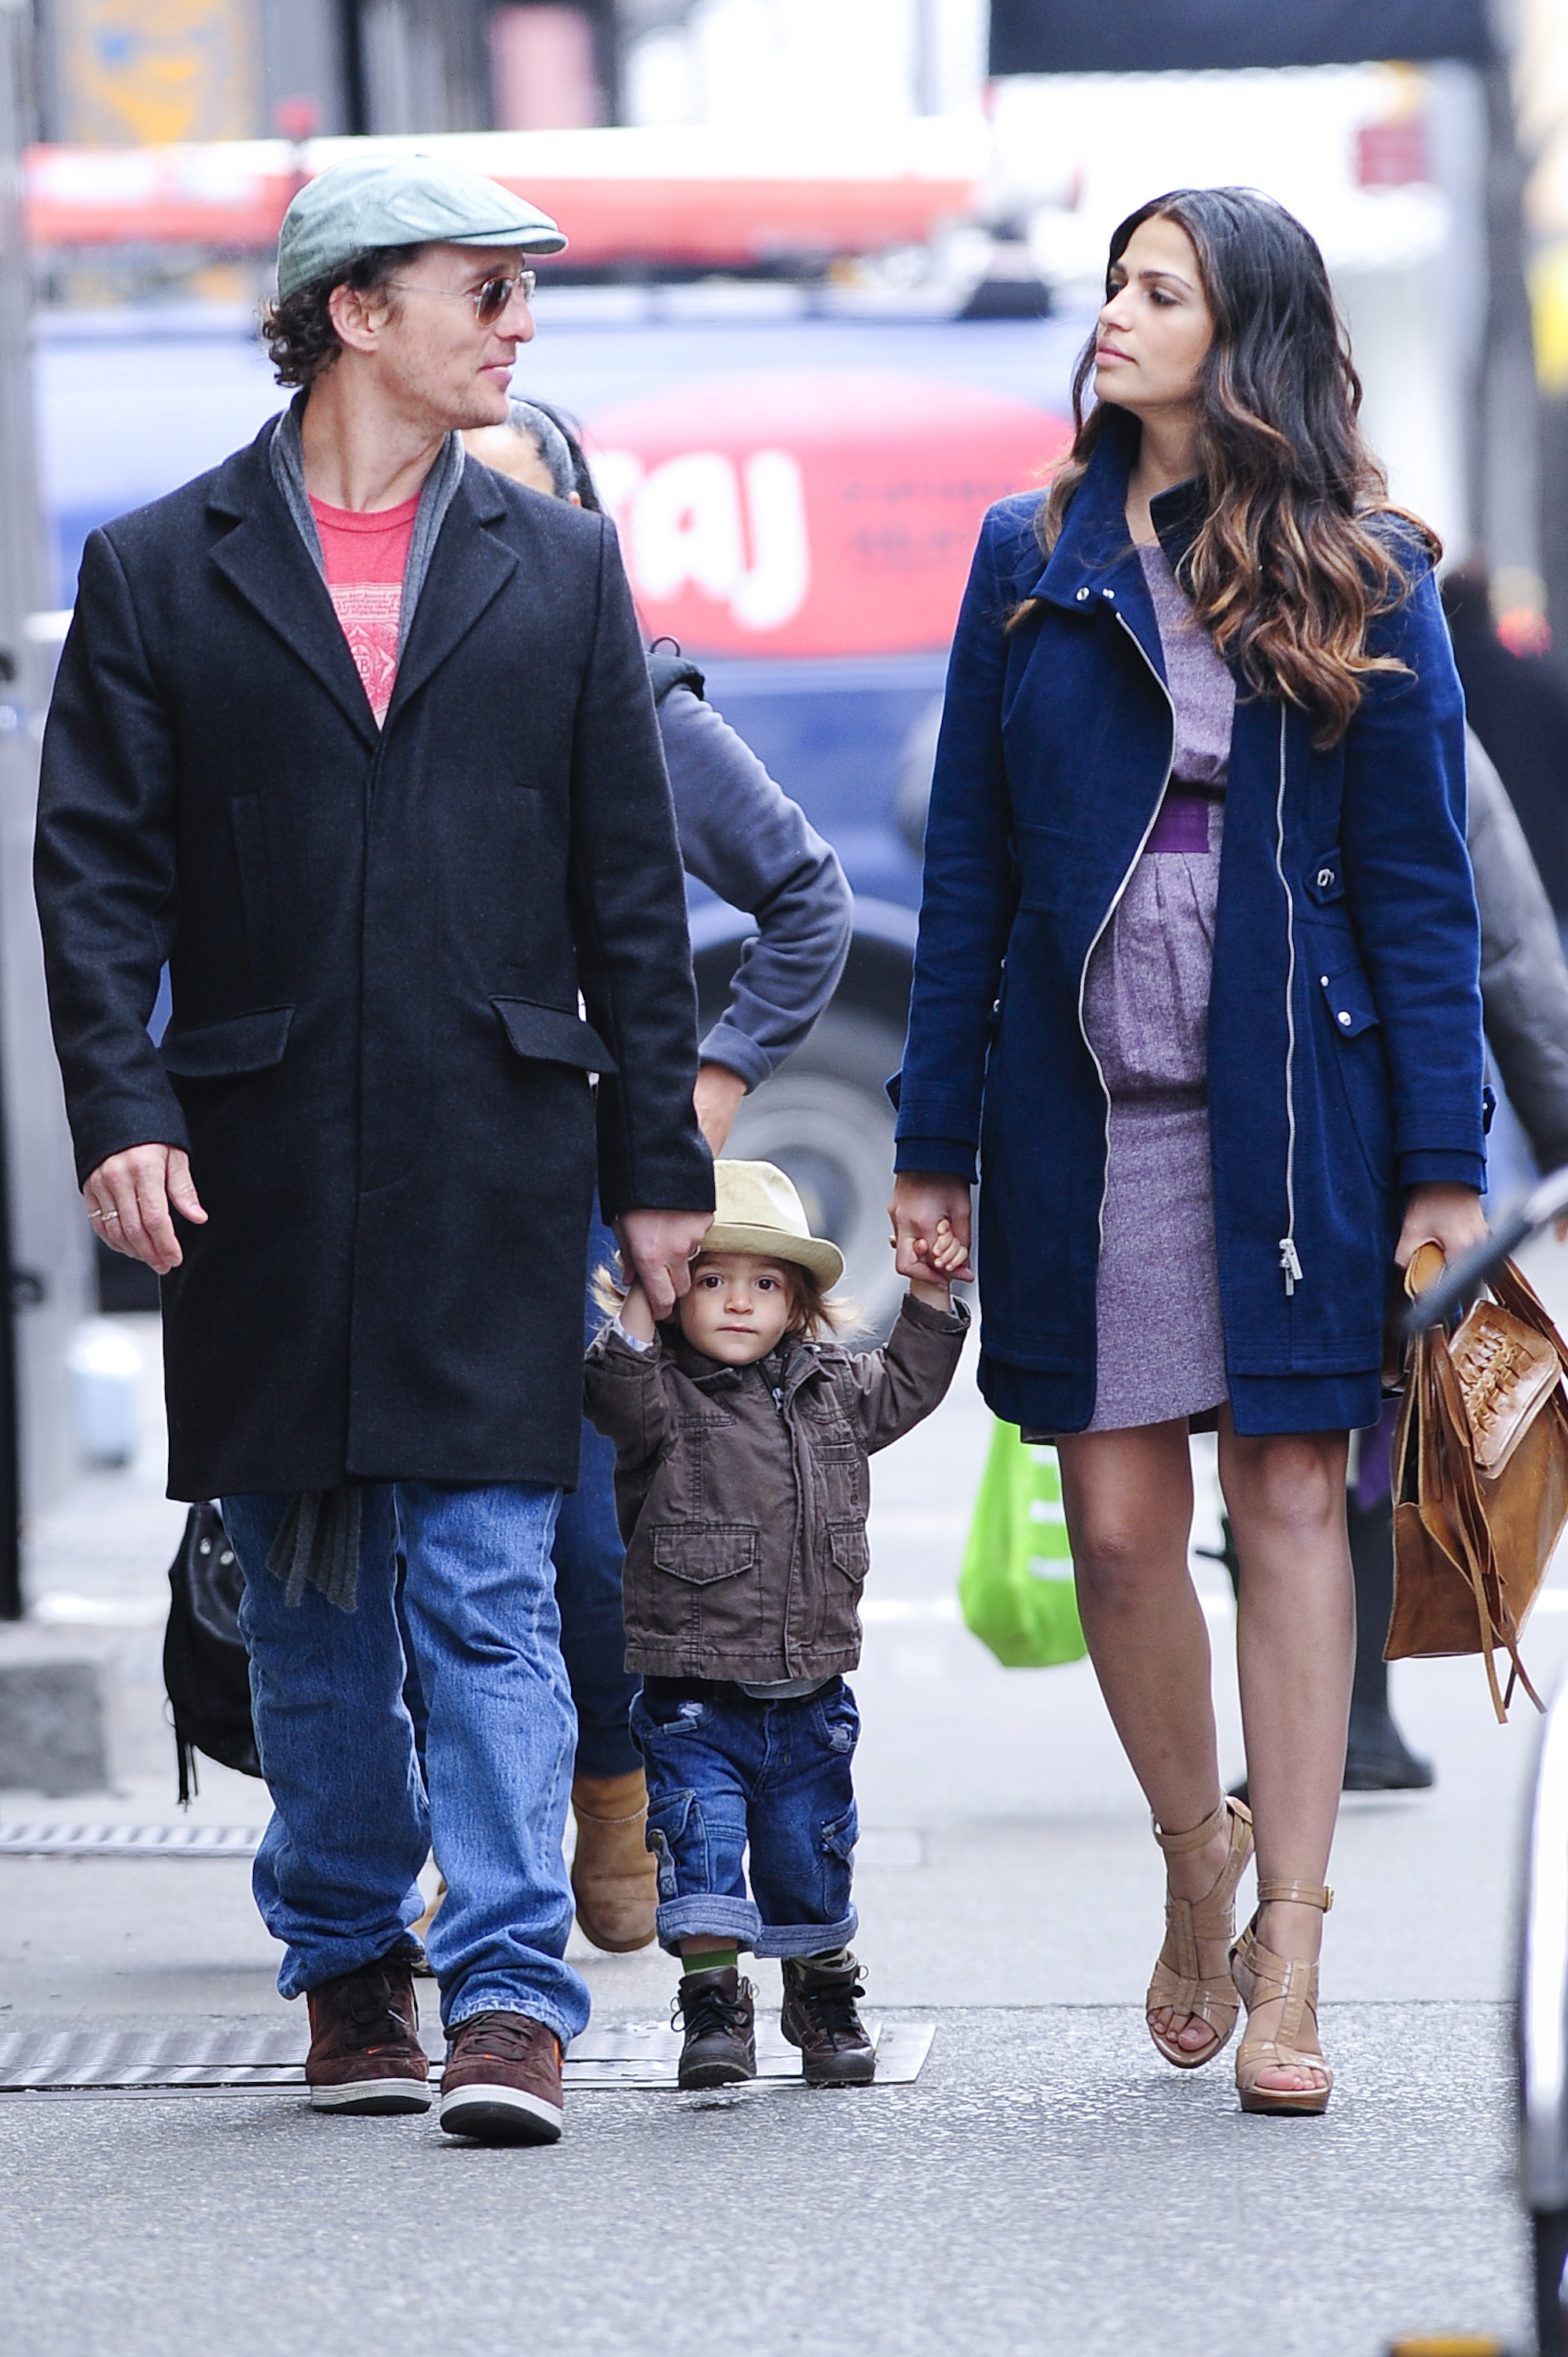 Matthew McConaughey, Levi McConaughey, and Camila Alves walk in Soho in New York City, on March 11, 2010. | Source: Getty Images